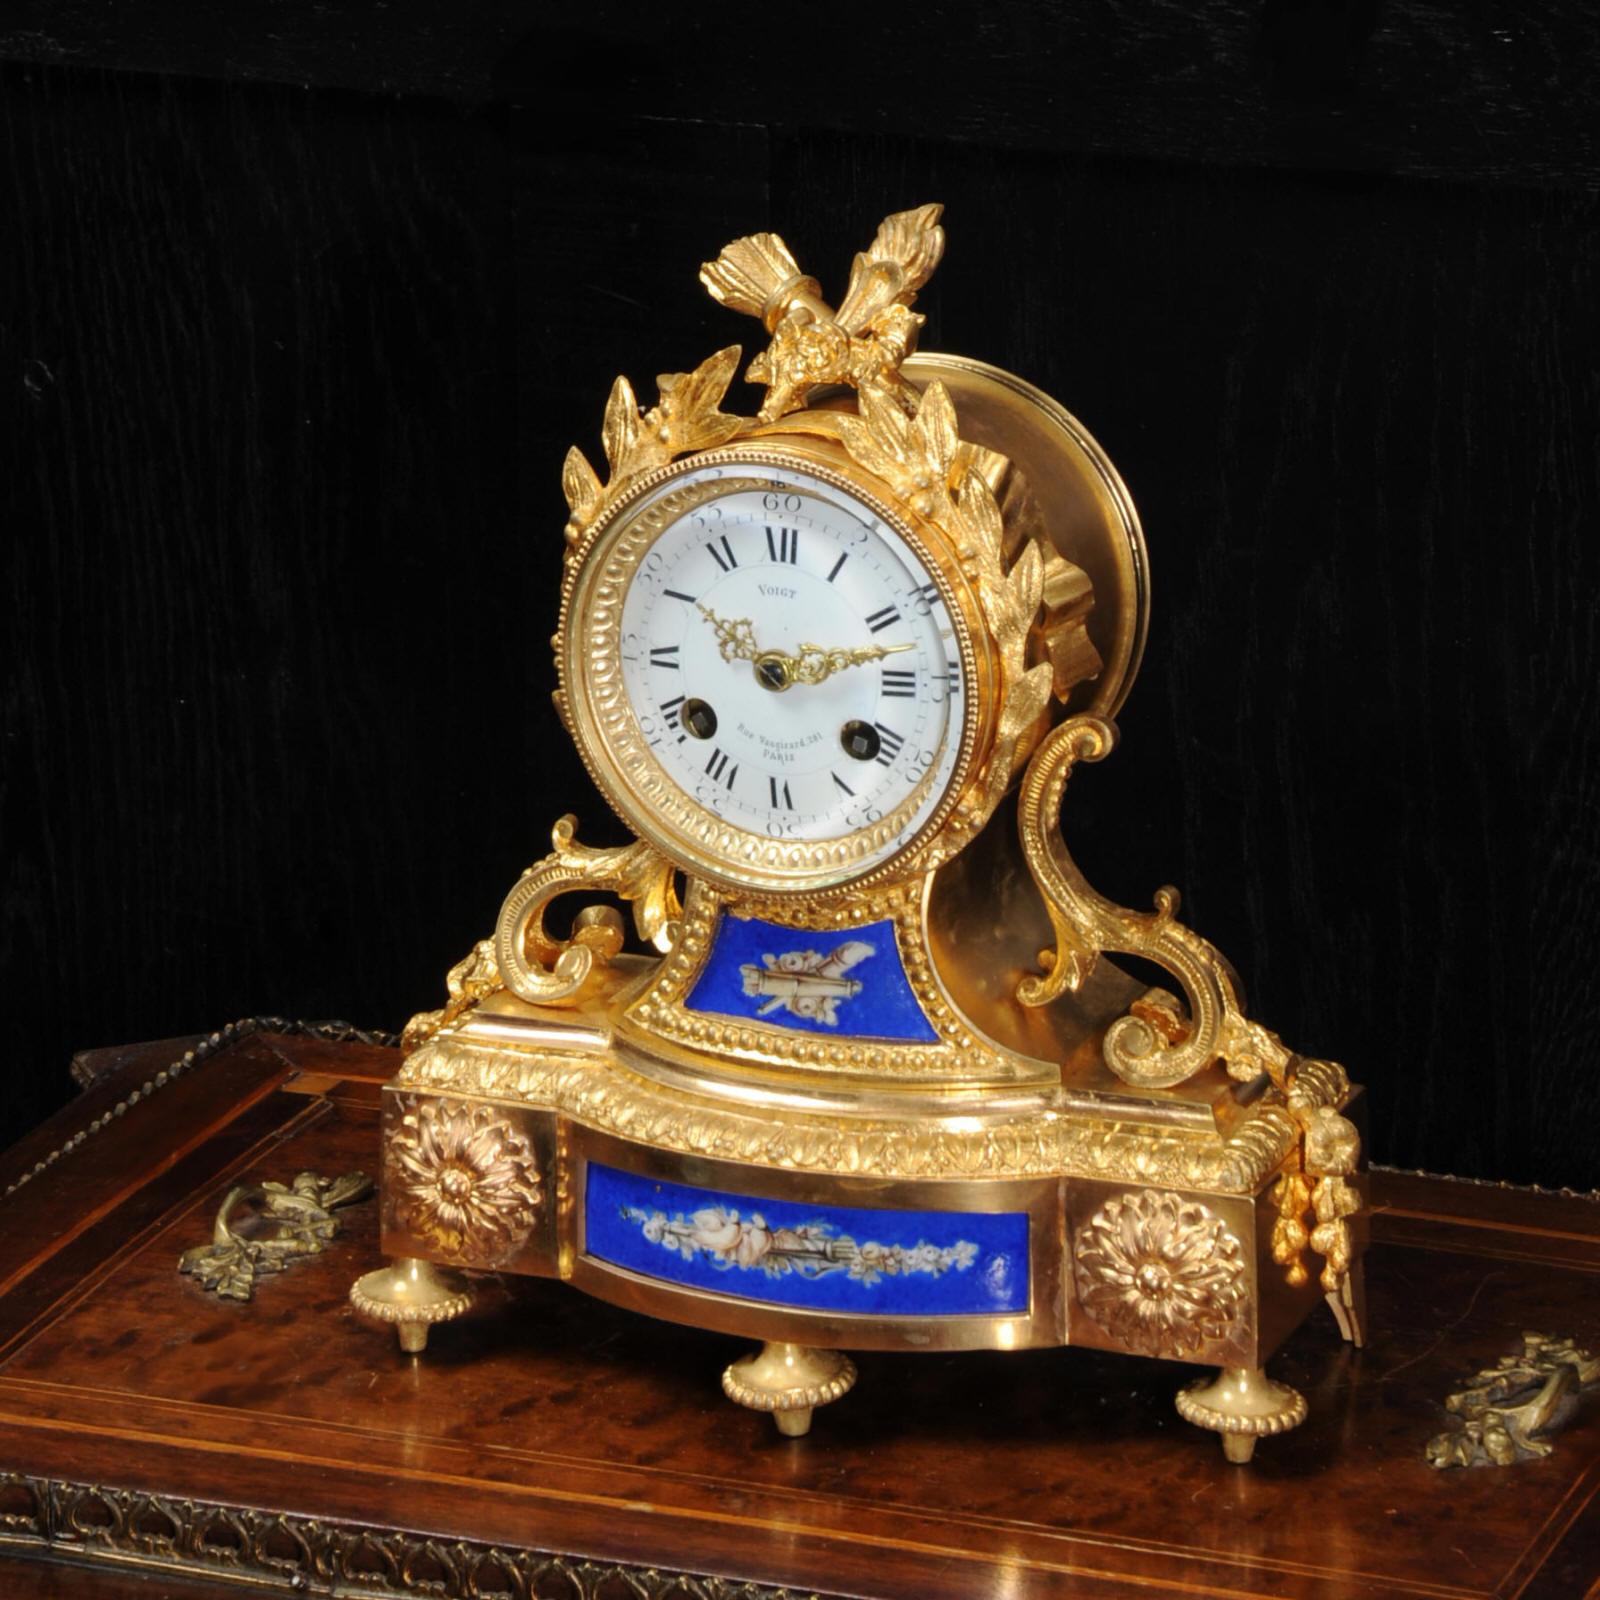 A beautiful and early antique French clock by the famous maker Japy Freres, circa 1860. It is modelled in ormolu (finely gilded bronze), mounted with beautiful porcelain with a blue ground decorated with flaming torche, quiver of arrows and a pair